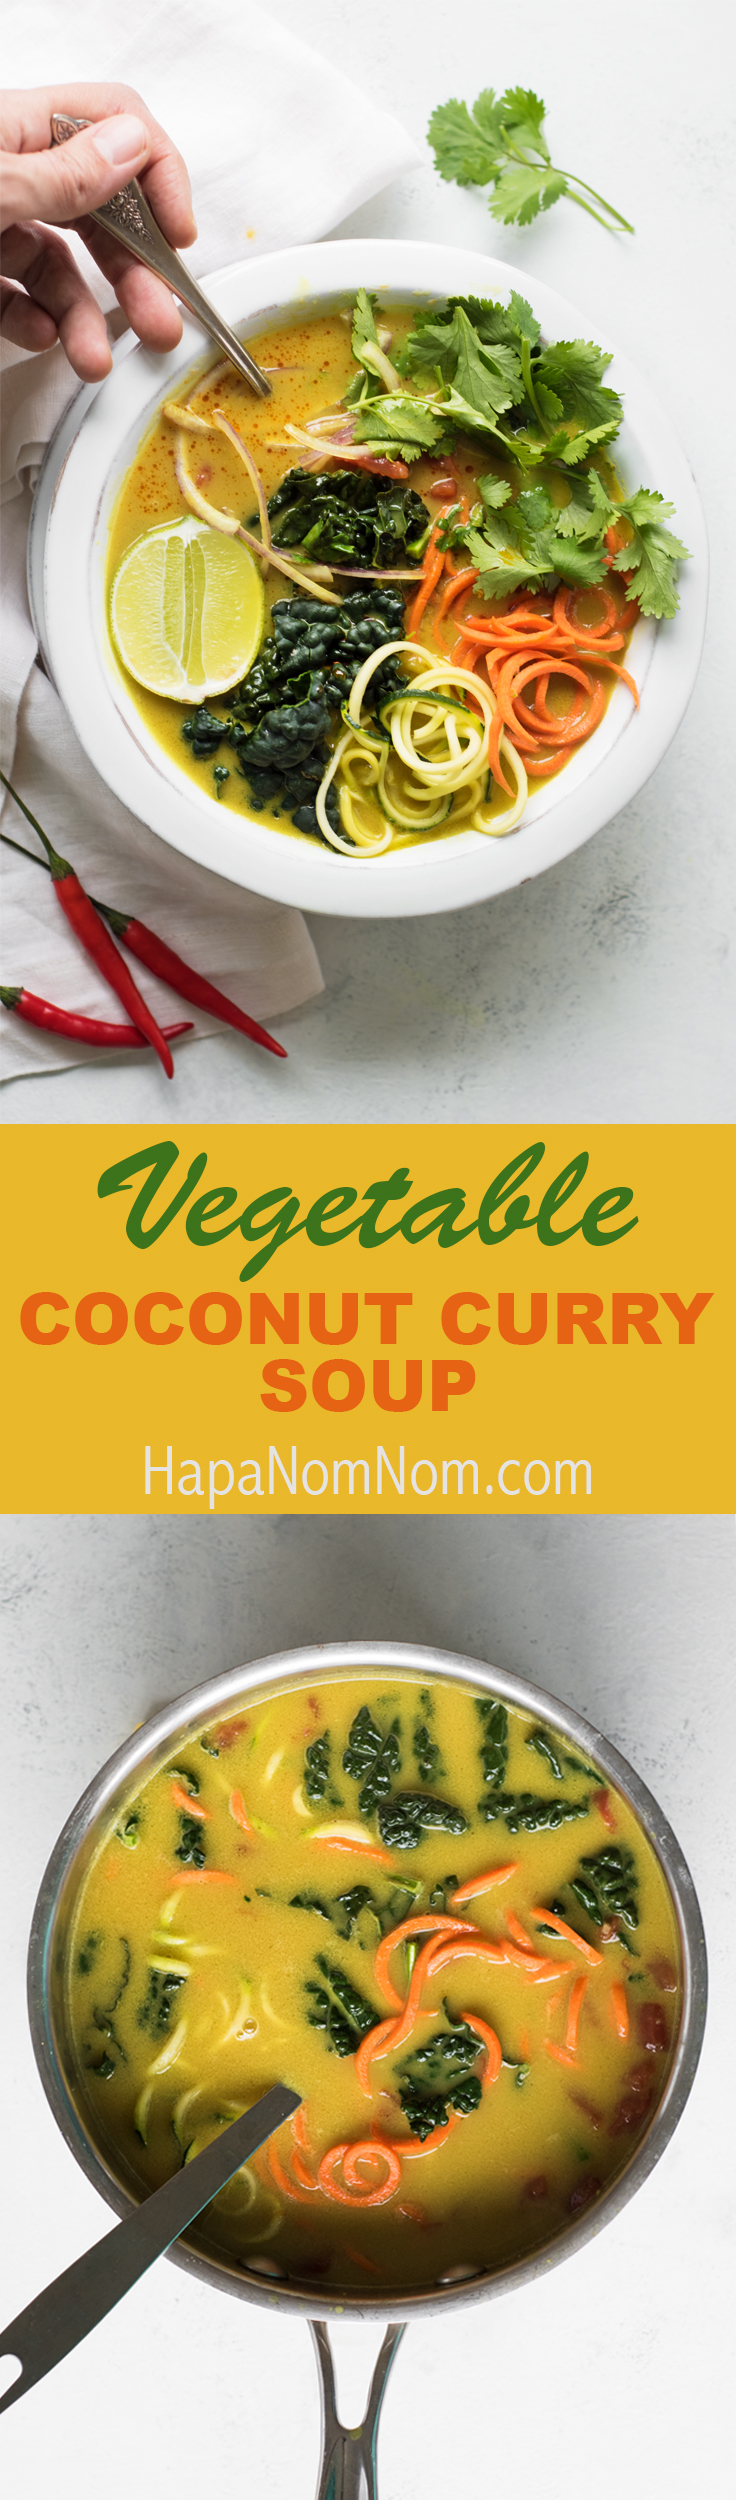 This Vegetable Coconut Curry Soup is rich, creamy, and packed with bold flavors and loaded with veggies.